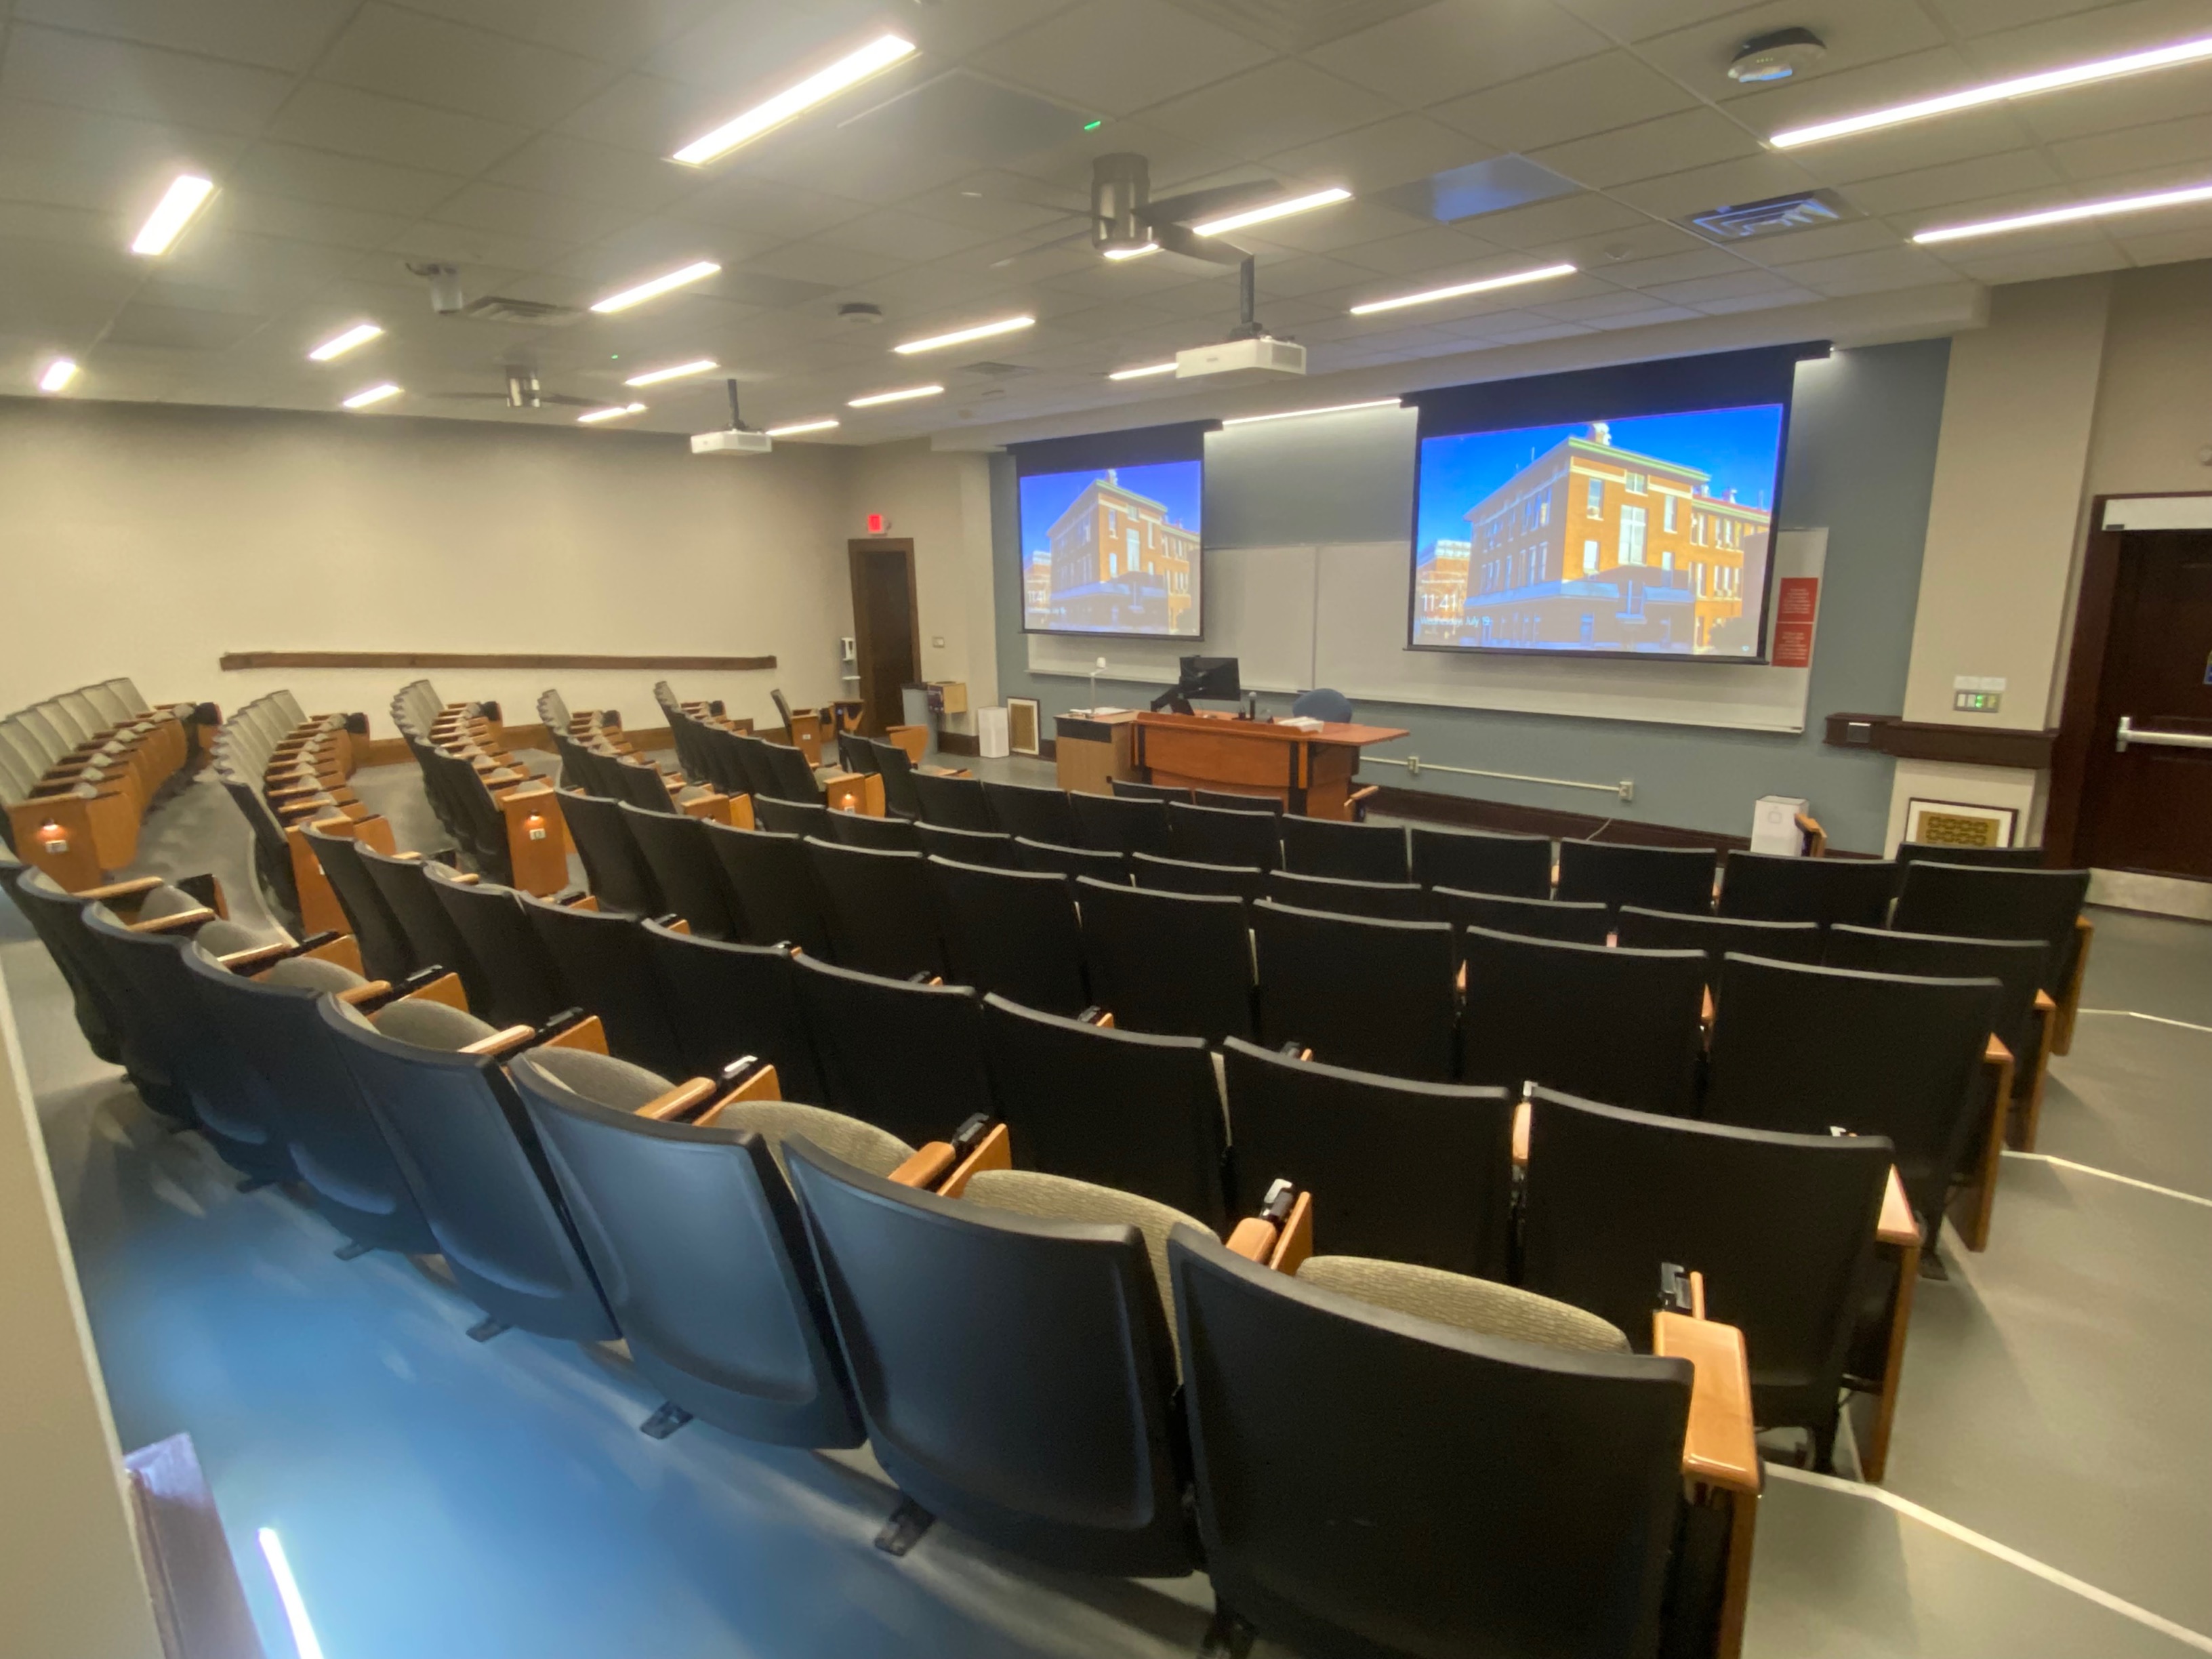 A view of the classroom with theater auditorium seating, projectors and screens, white boards, and instructor lectern in front. 